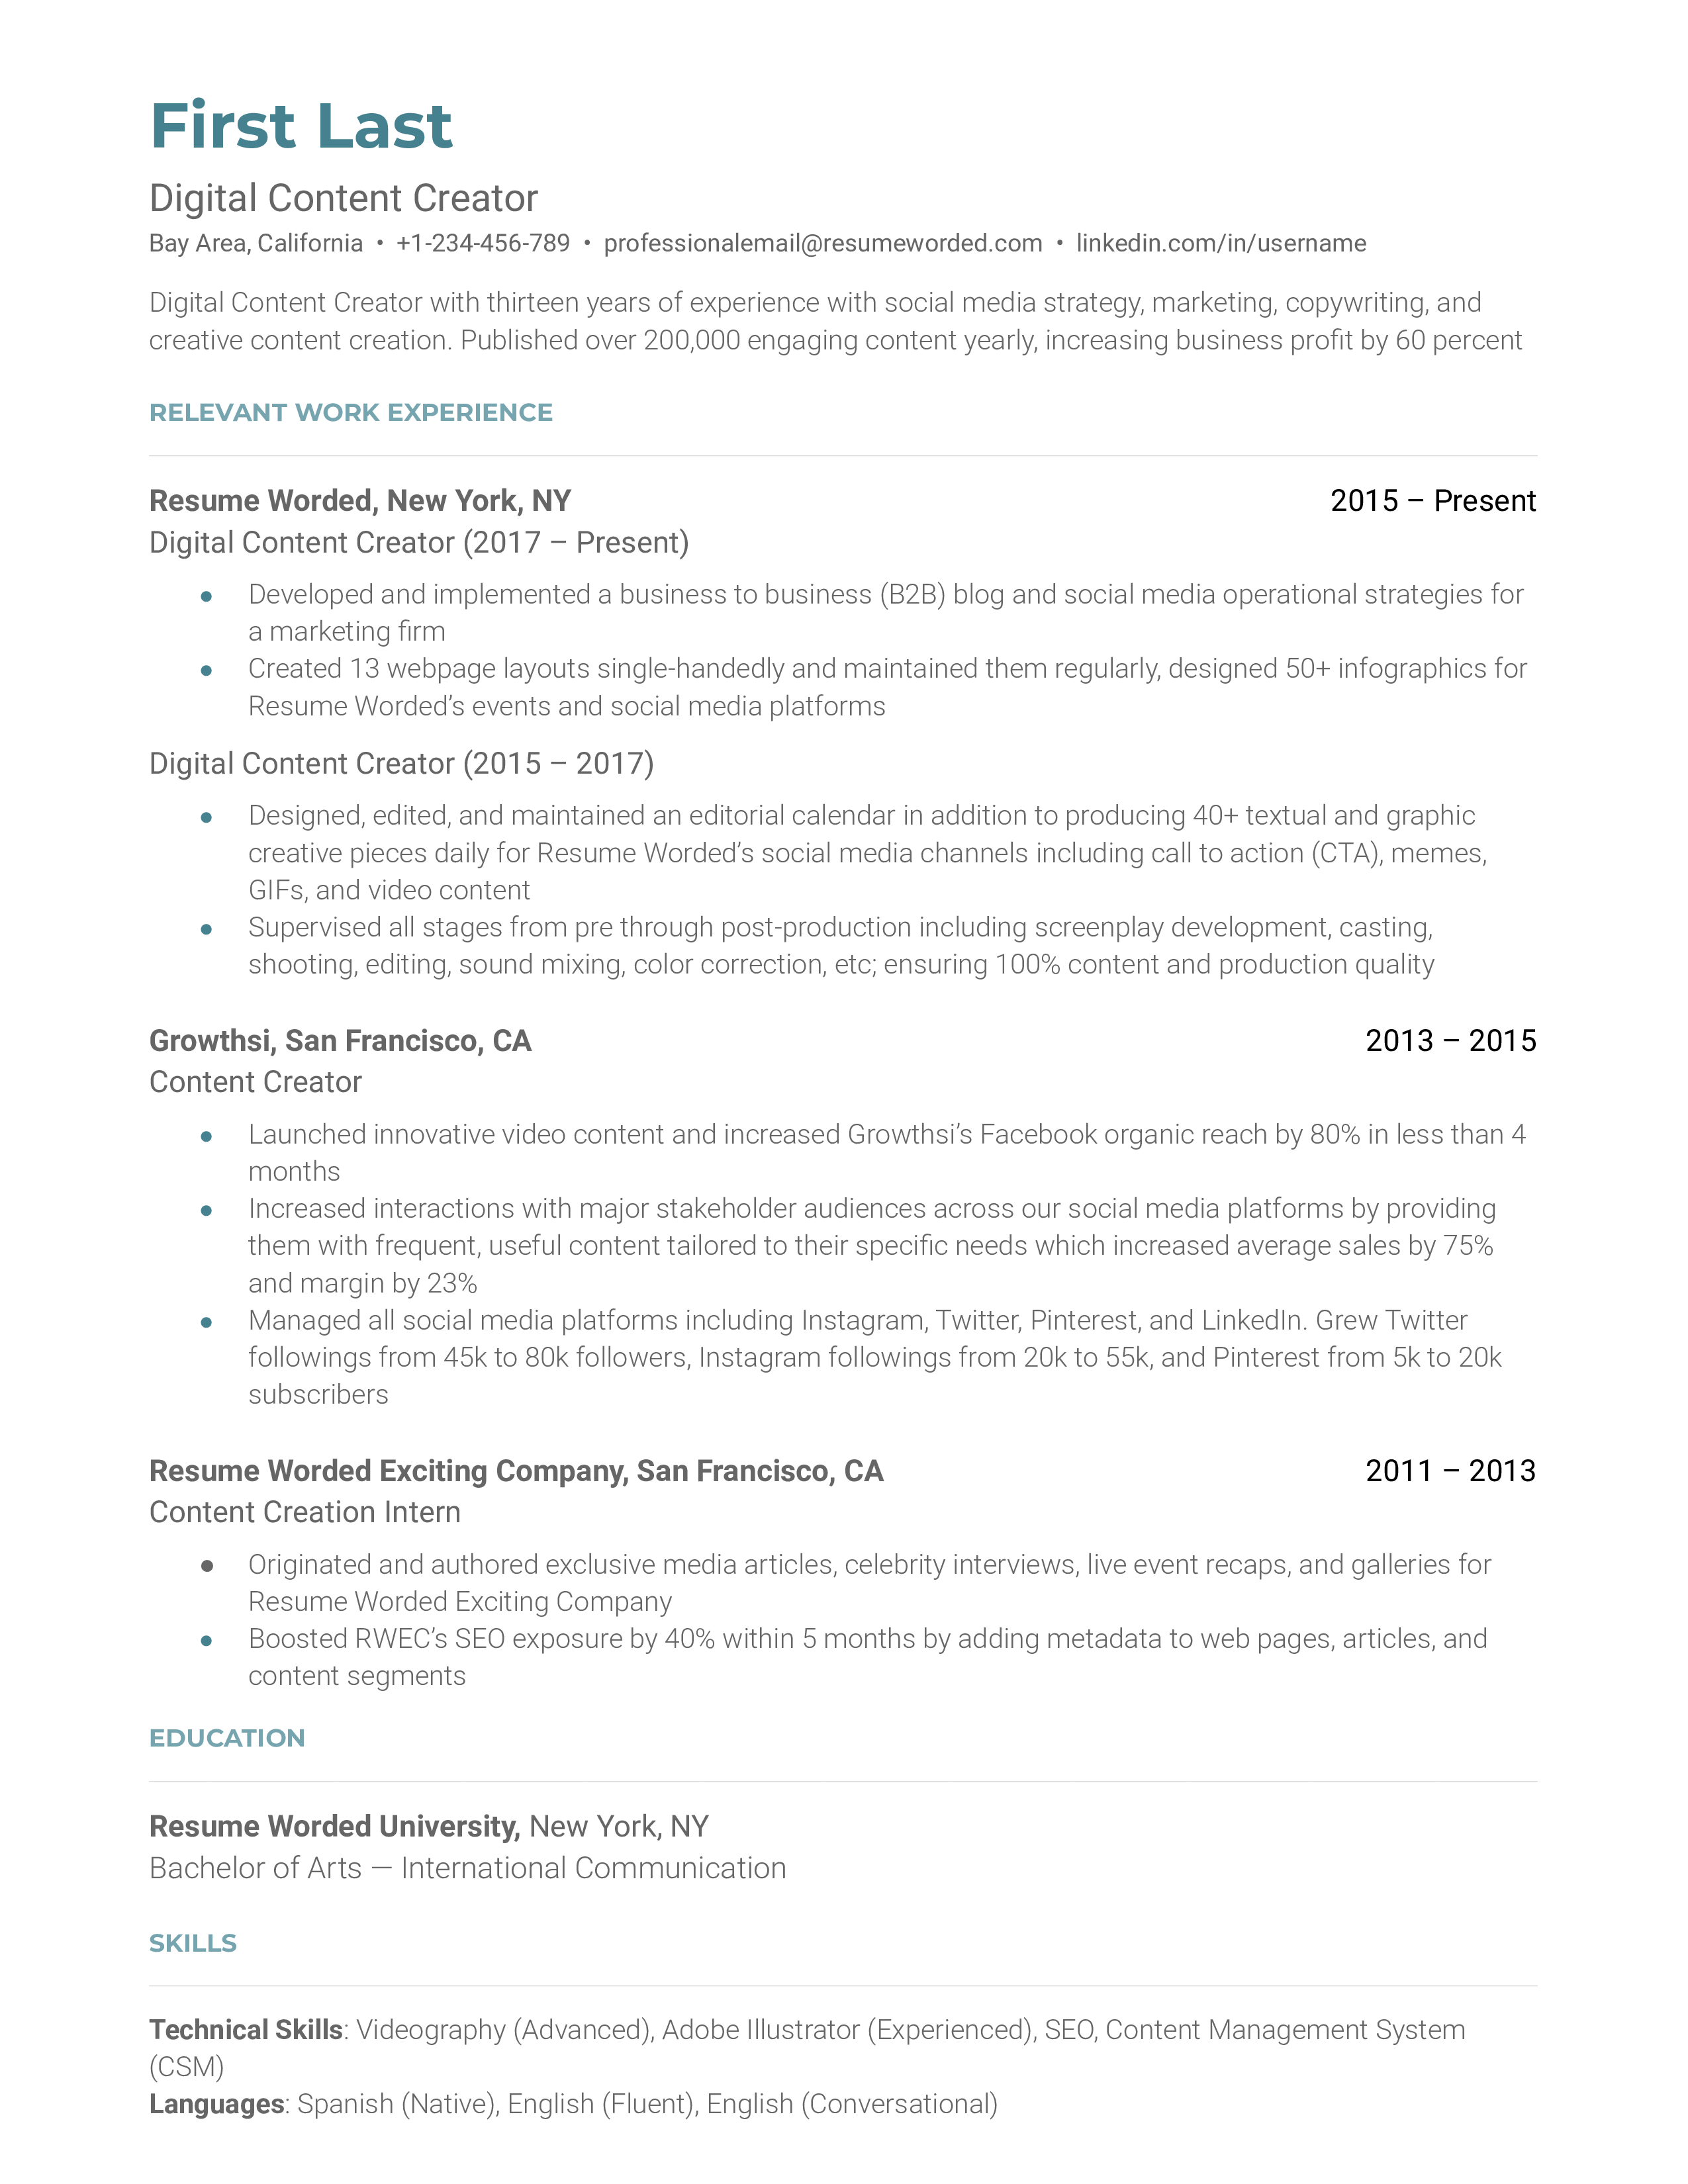 Digital content creator resume sample that highlights applicant's value addition and digital related skills.